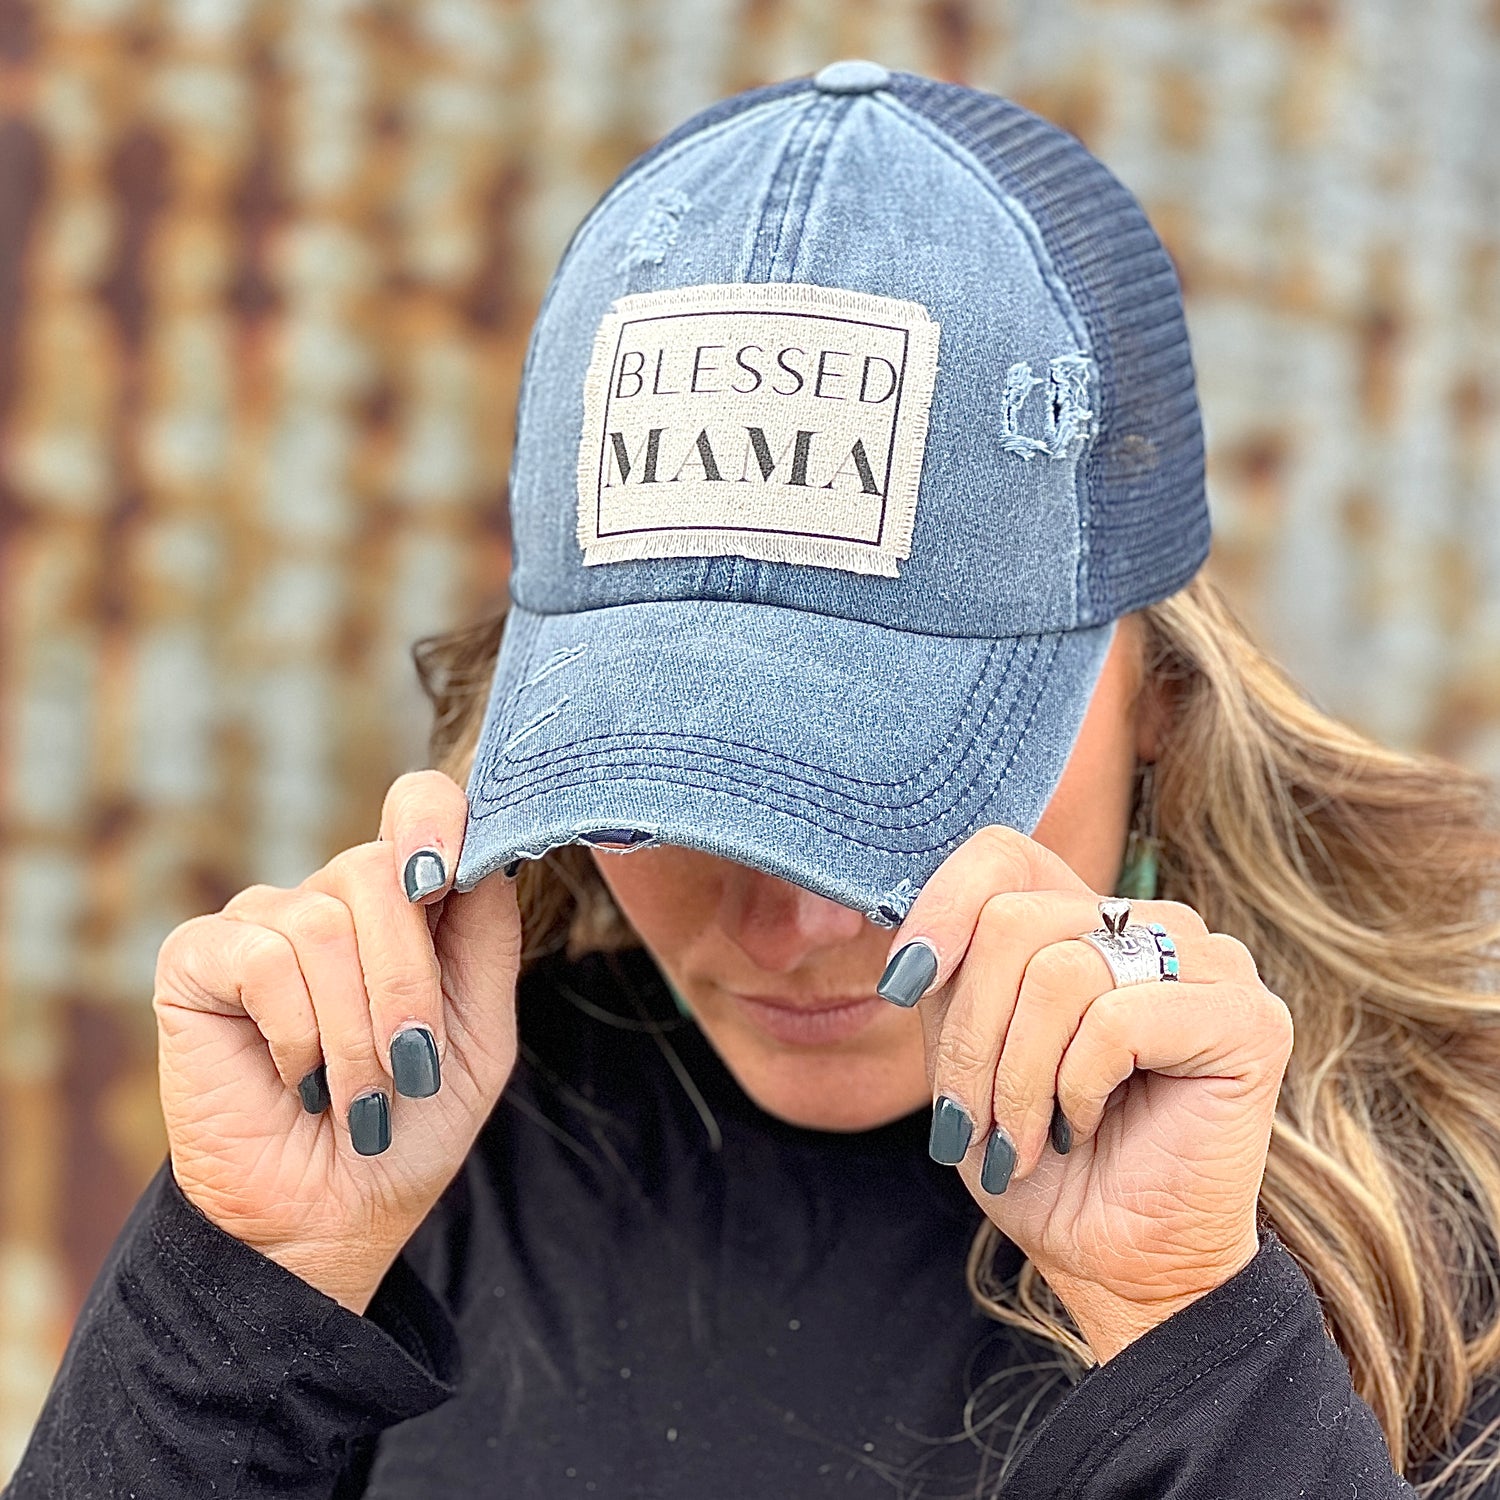 Blessed Mama material patch on distressed navy baseball cap.